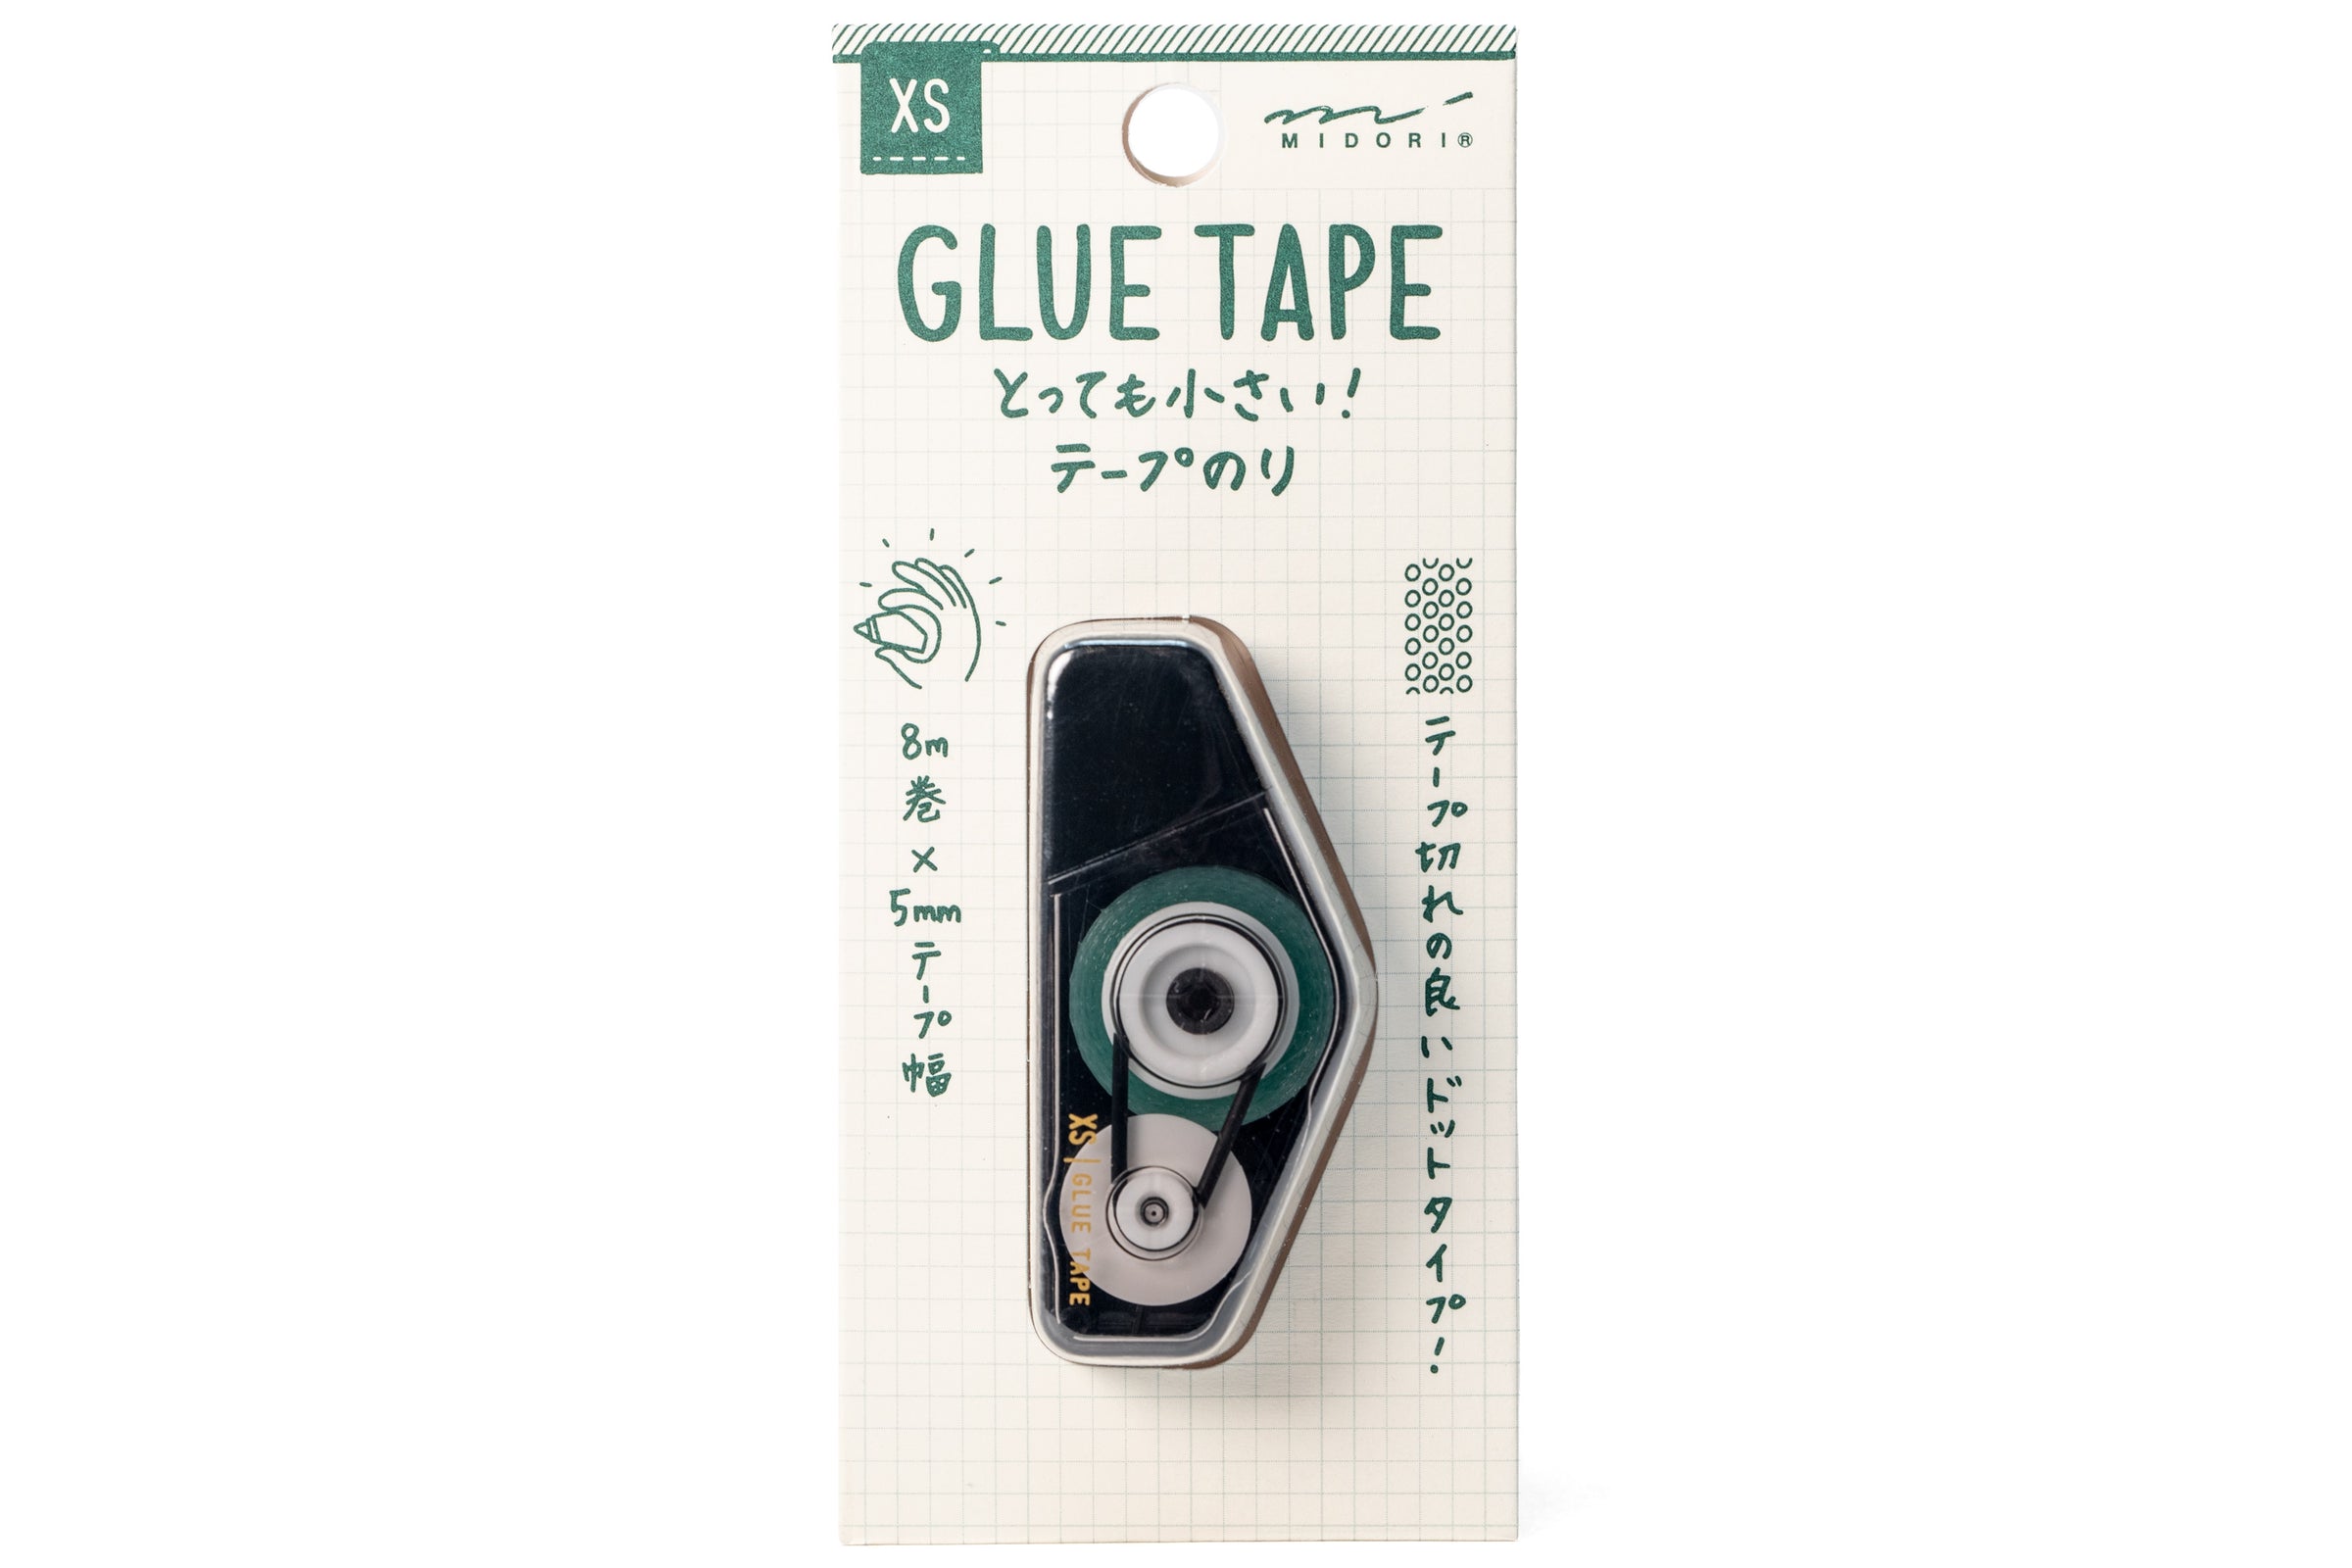 Glue Tape, Products